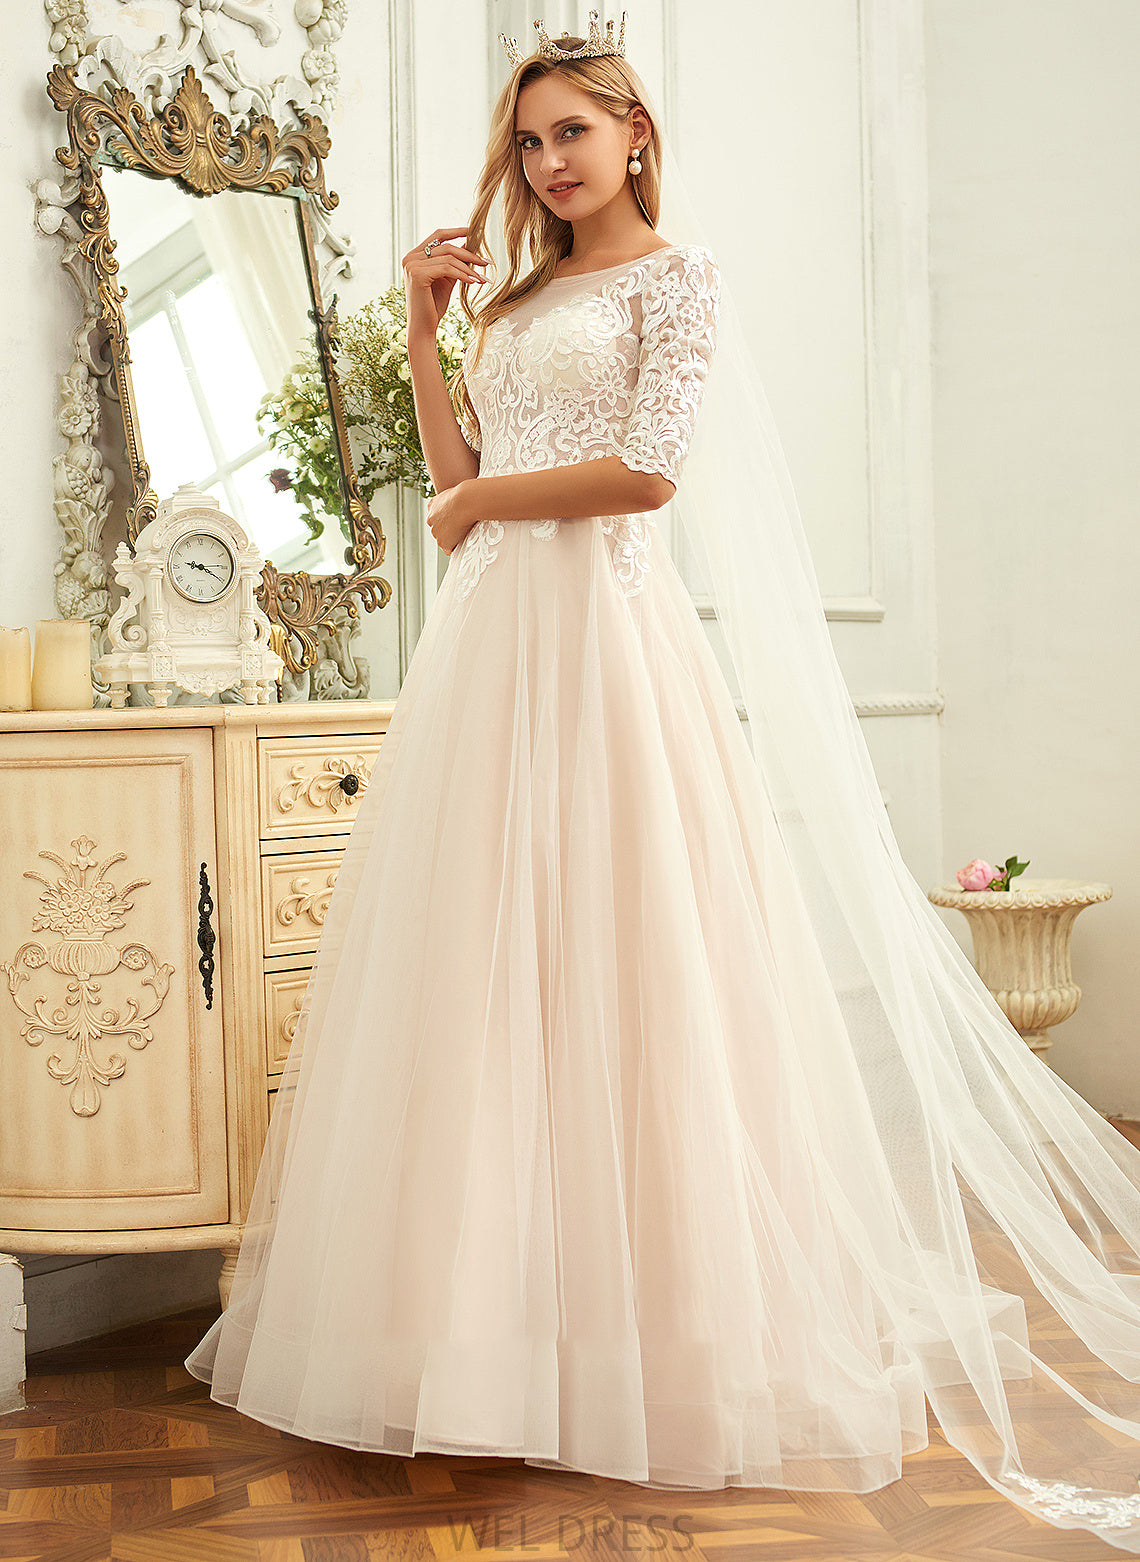 Scoop Lace Sweep Wedding Ball-Gown/Princess Keyla Neck Train Tulle Wedding Dresses Dress